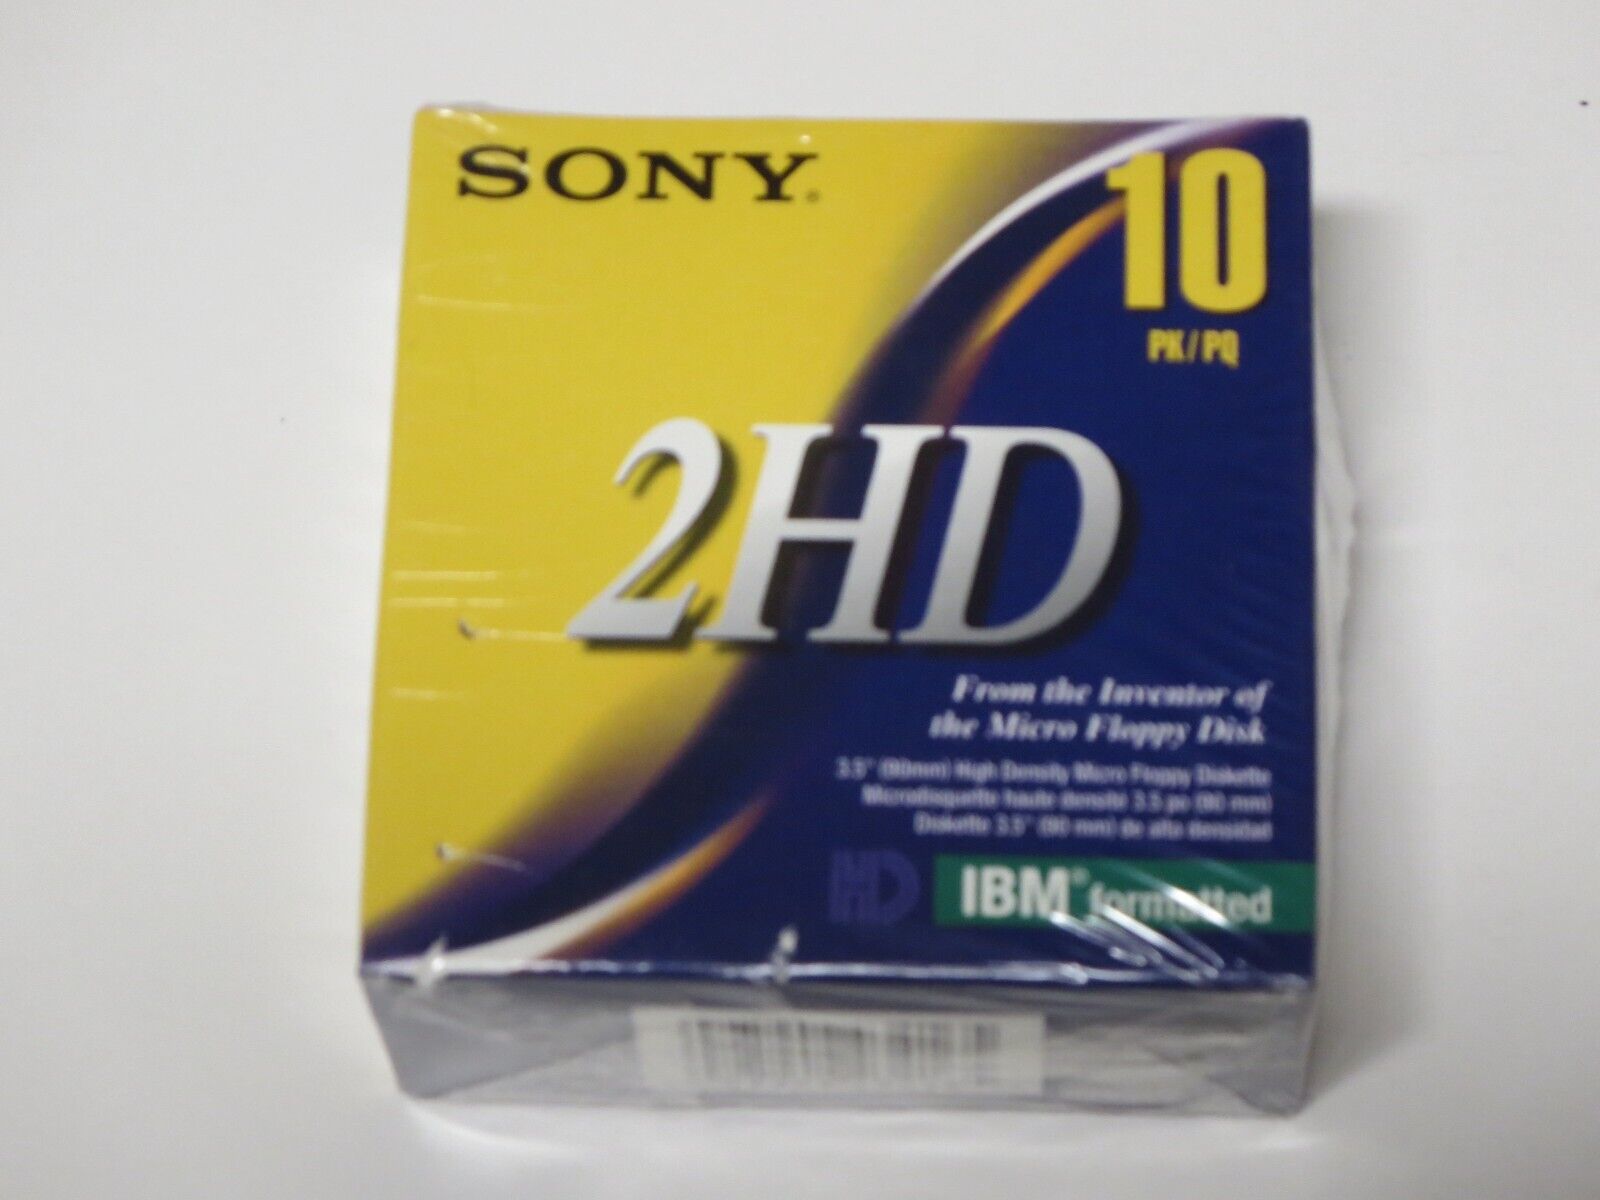 Genuine Sony 2HD Floppy Diskettes IBM Formatted 1.44 MB 3.5 Inch 10 Pack Sealed